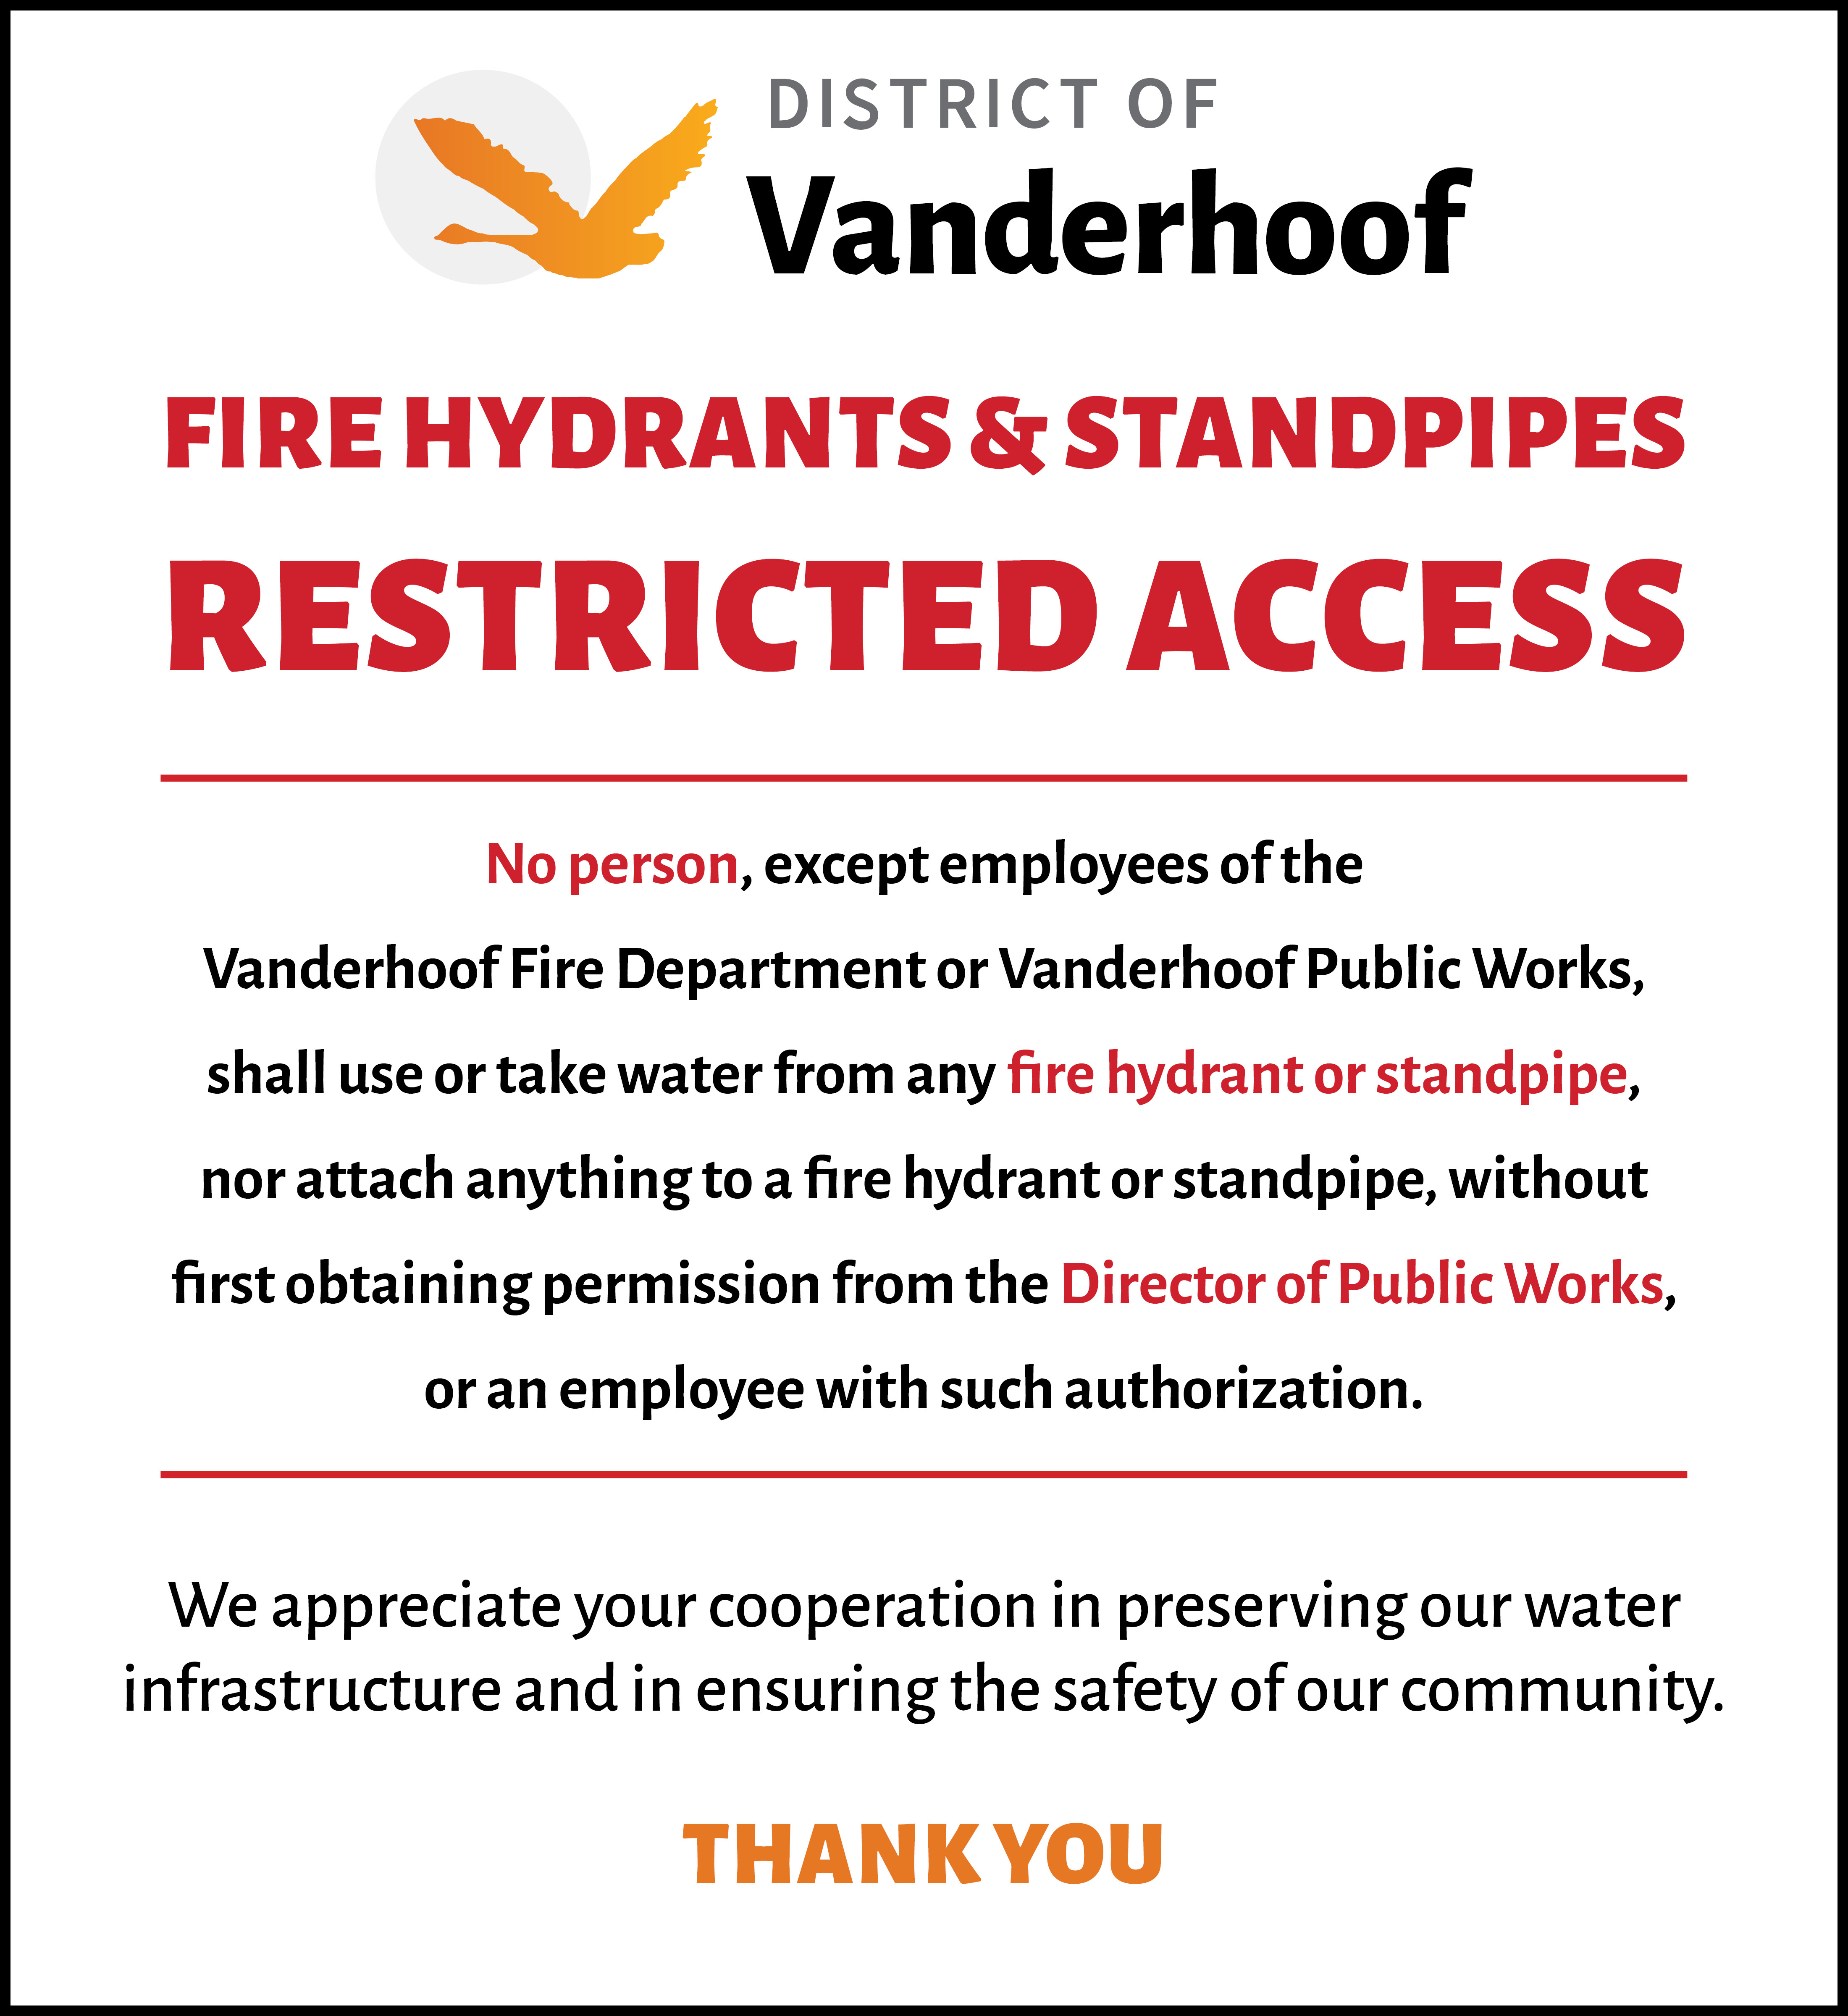 Fire Hydrants & Standpipes, Restricted Access. No person, except employees of the Vanderhoof Fire Department or Vanderhoof Public Works, shall use or take water from any fire hydrant or standpipe, nor attach anything to a fire hydrant or standpipe, without first obtaining permission from the Director of Public Works, or an employee with such authorization. We appreciate your cooperation in preserving our water infrastructure and in ensuring the safety of our community.  Thank You